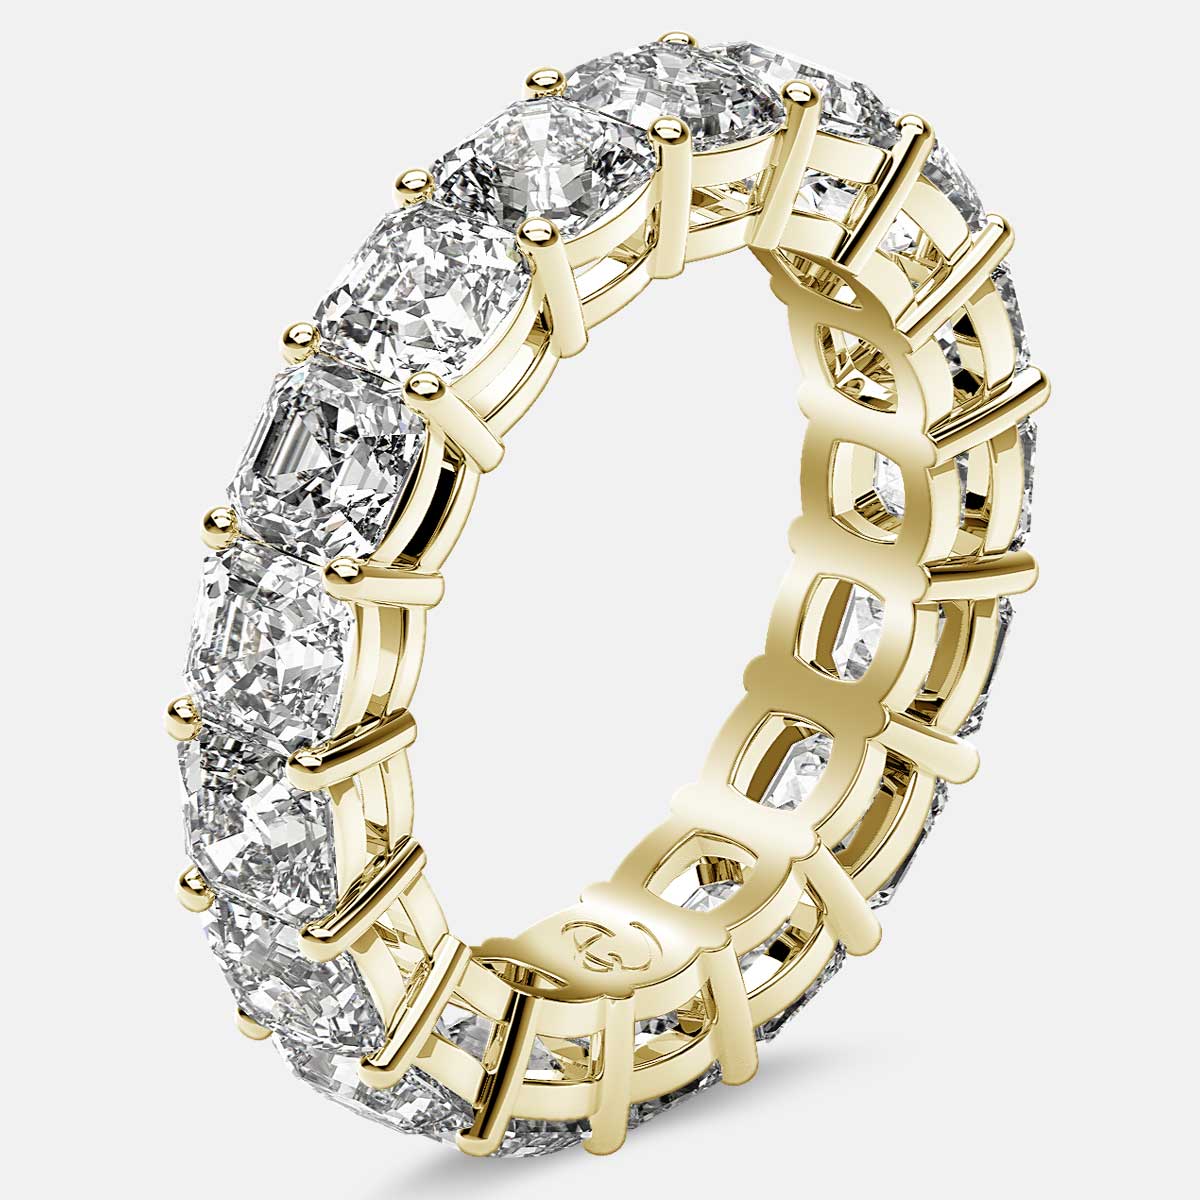 Asscher Cut Diamond Eternity Band and Ring Online - Eternity Us